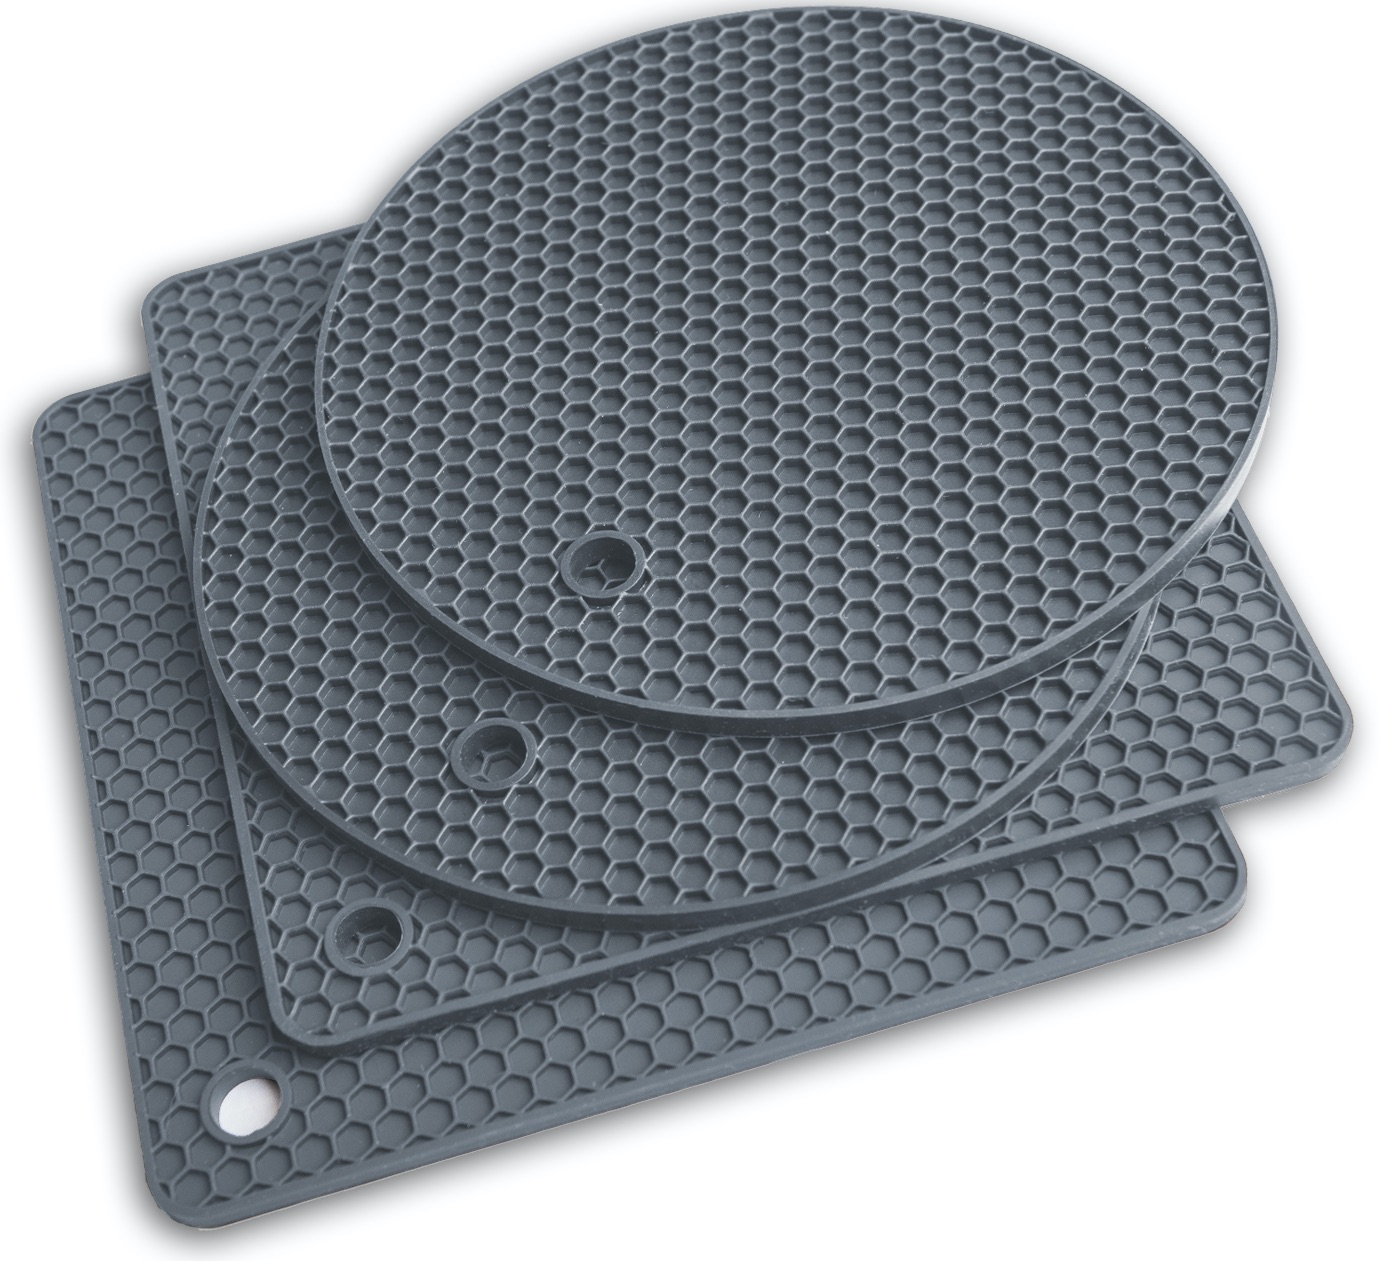 Large Silicone Trivet Mat for Hot Dishes/Heat Resistant Pot Holder, 12x 9 Non Slip Thick Flexible Hot Pads for Kitchen Table Set of 2 (Black)